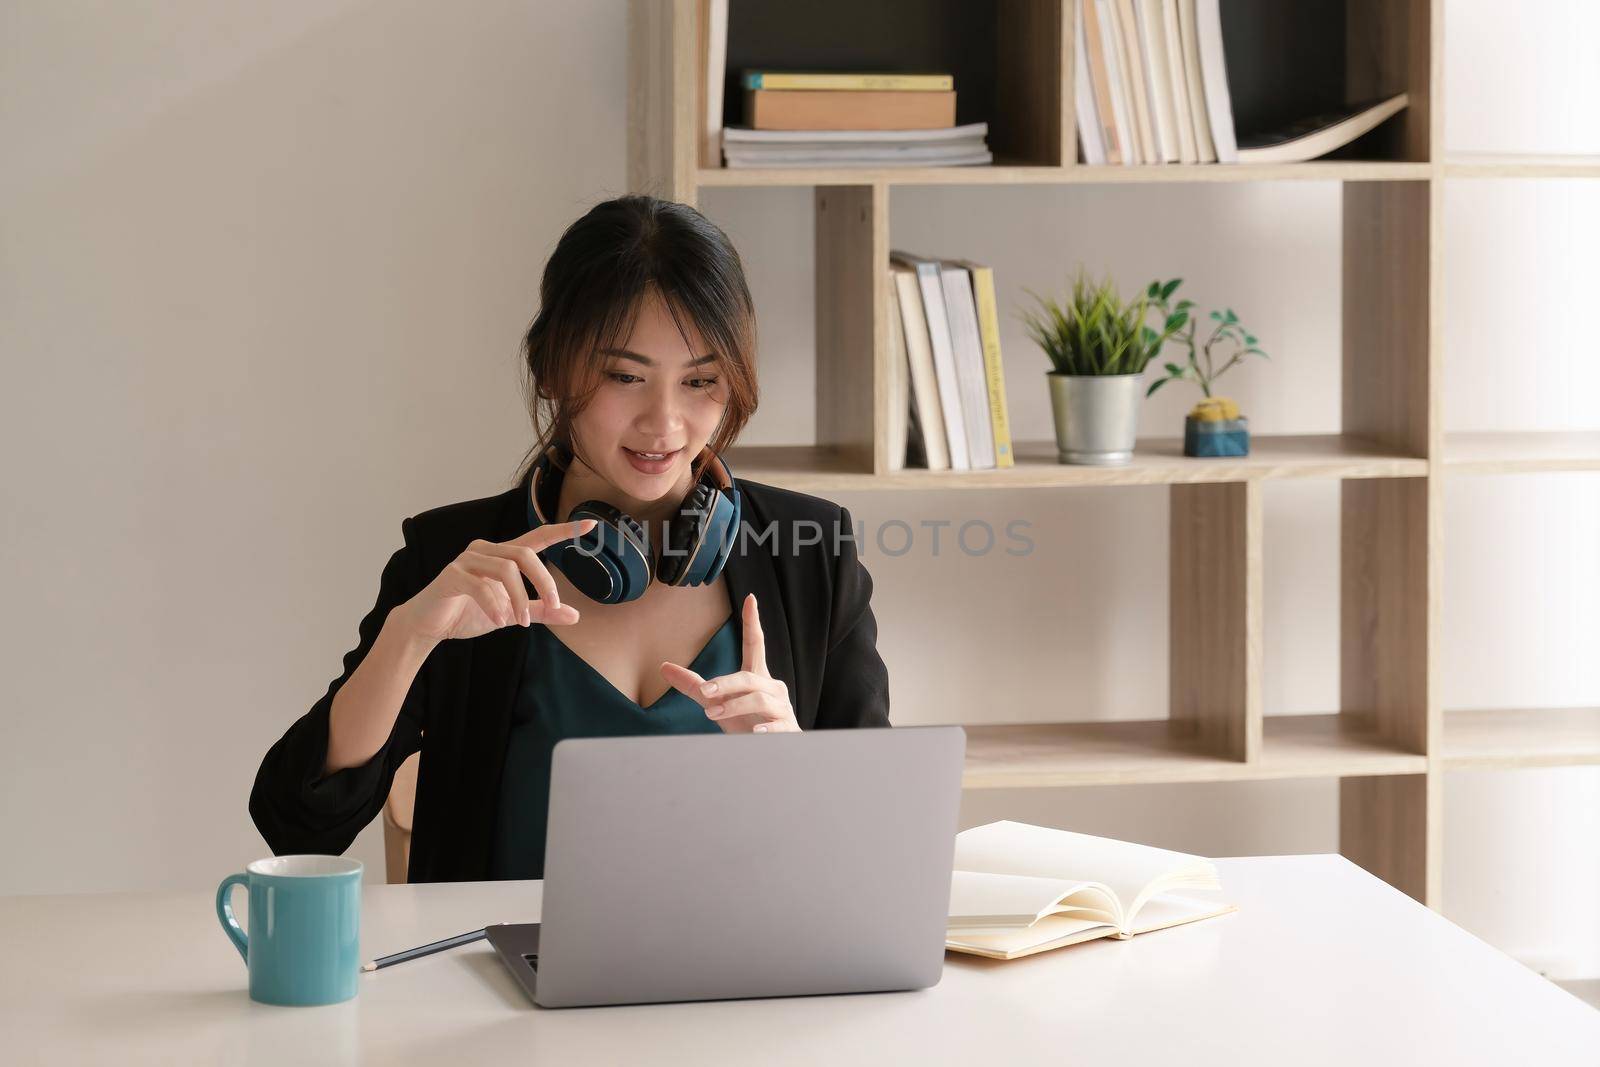 Asian student remote teacher tutor wear headphones video conference calling online, learning remote class webcam lesson looking at laptop virtual meeting working at home office.